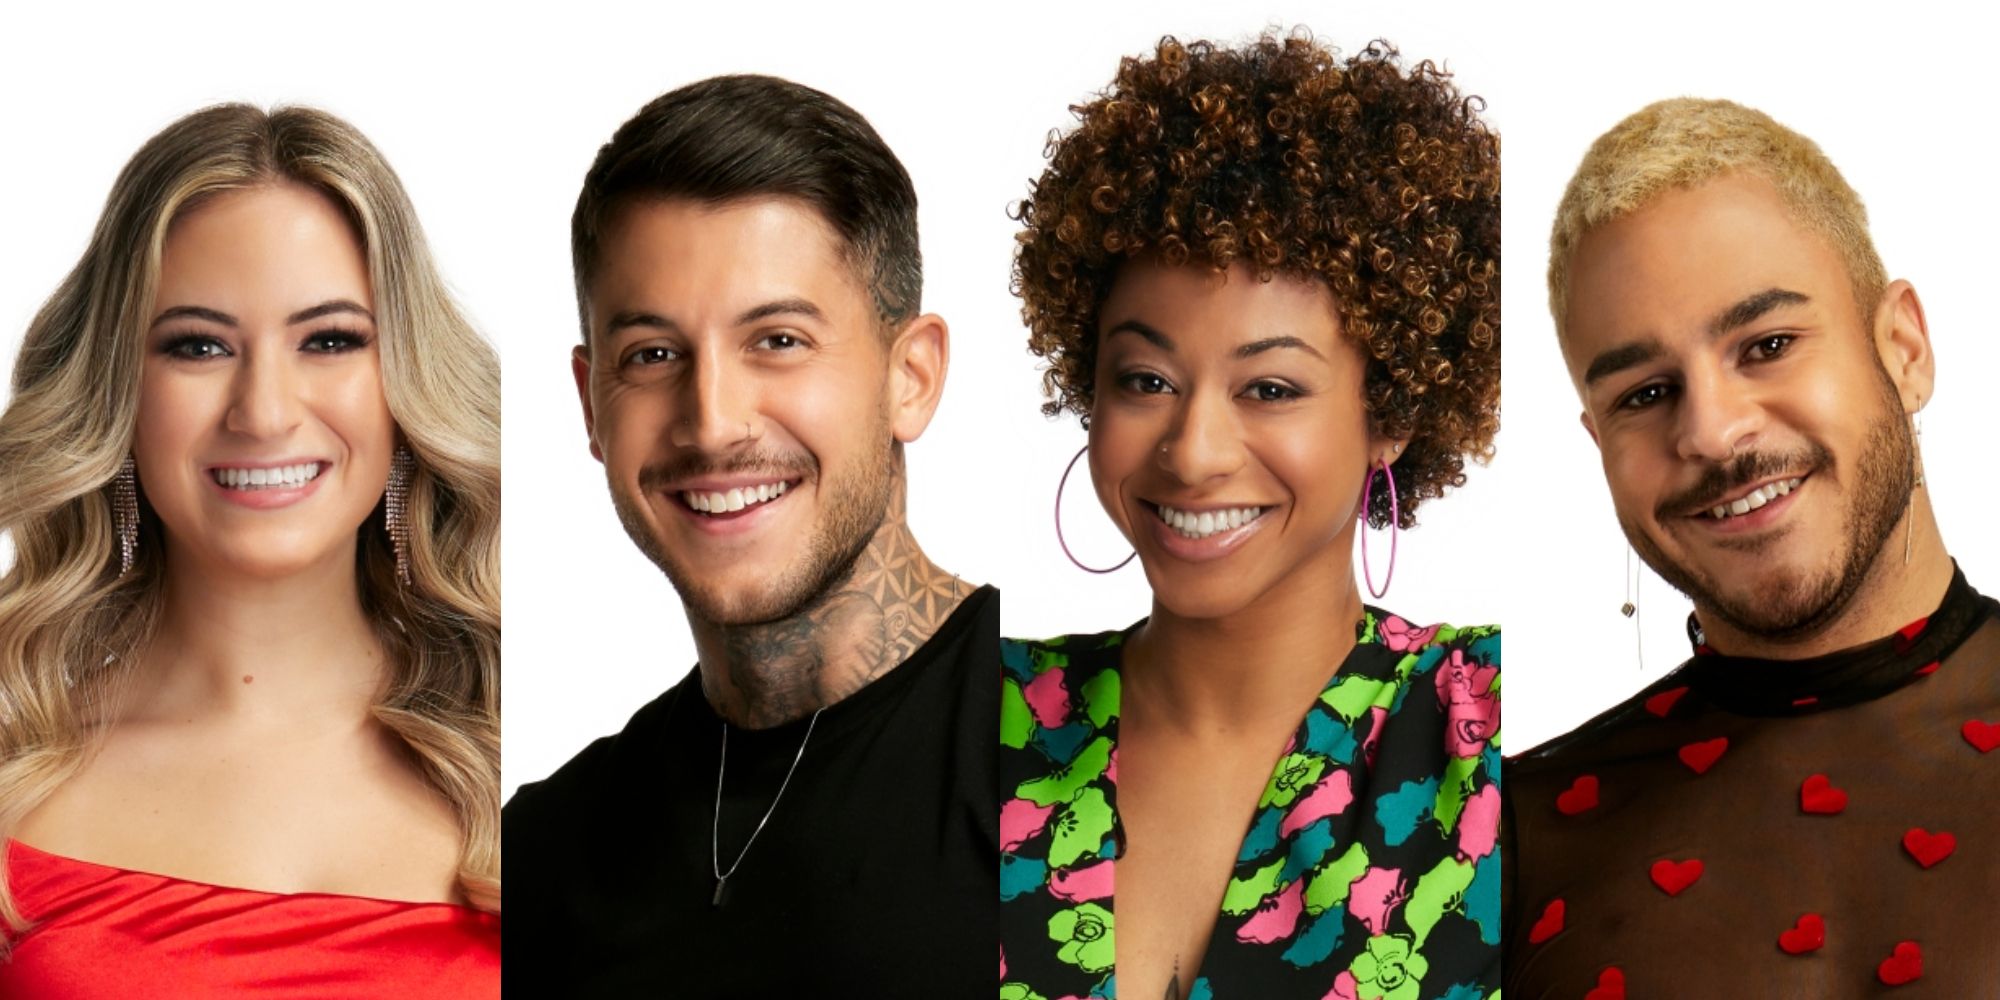 Stephanie Paterson, Gino Giannopoulos, Summer Sayles and Jay Northcott on Big Brother Canada 10